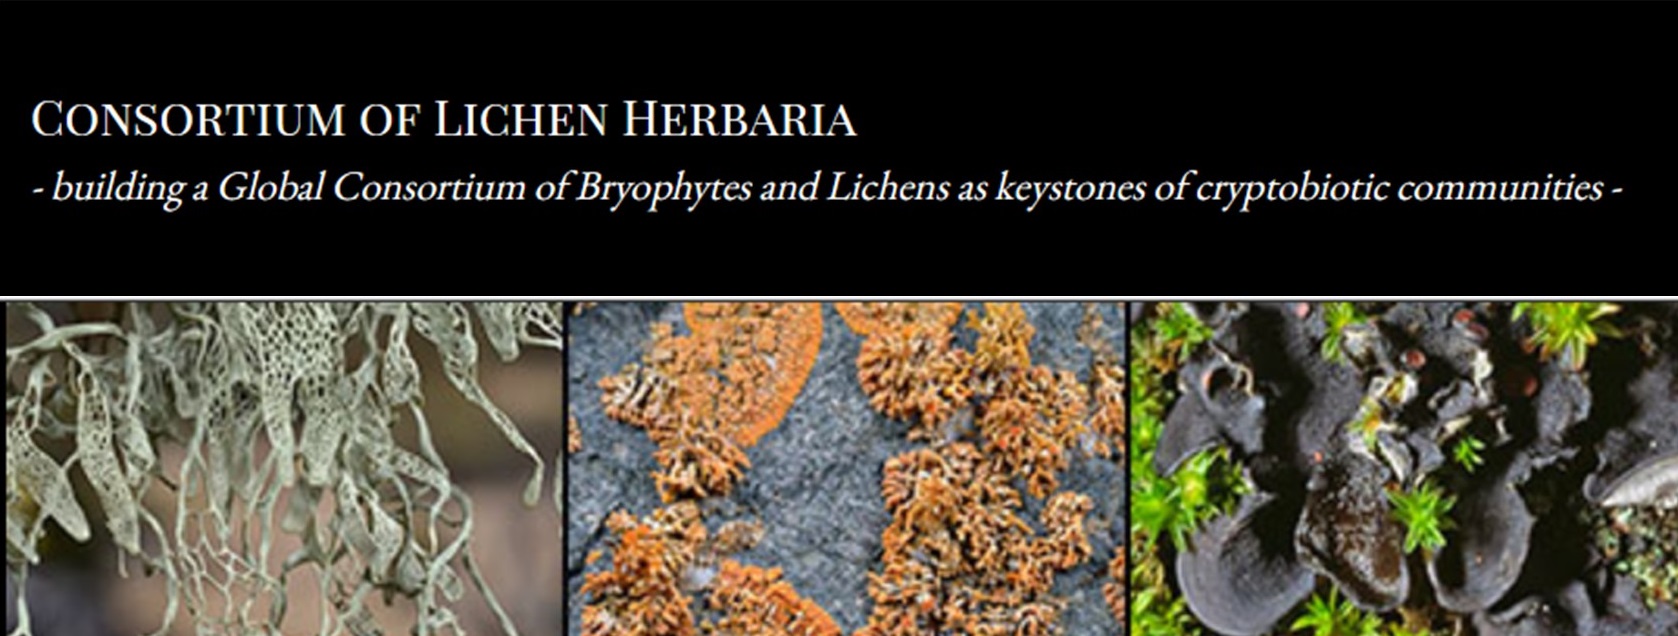 The Cabinet of Lichens